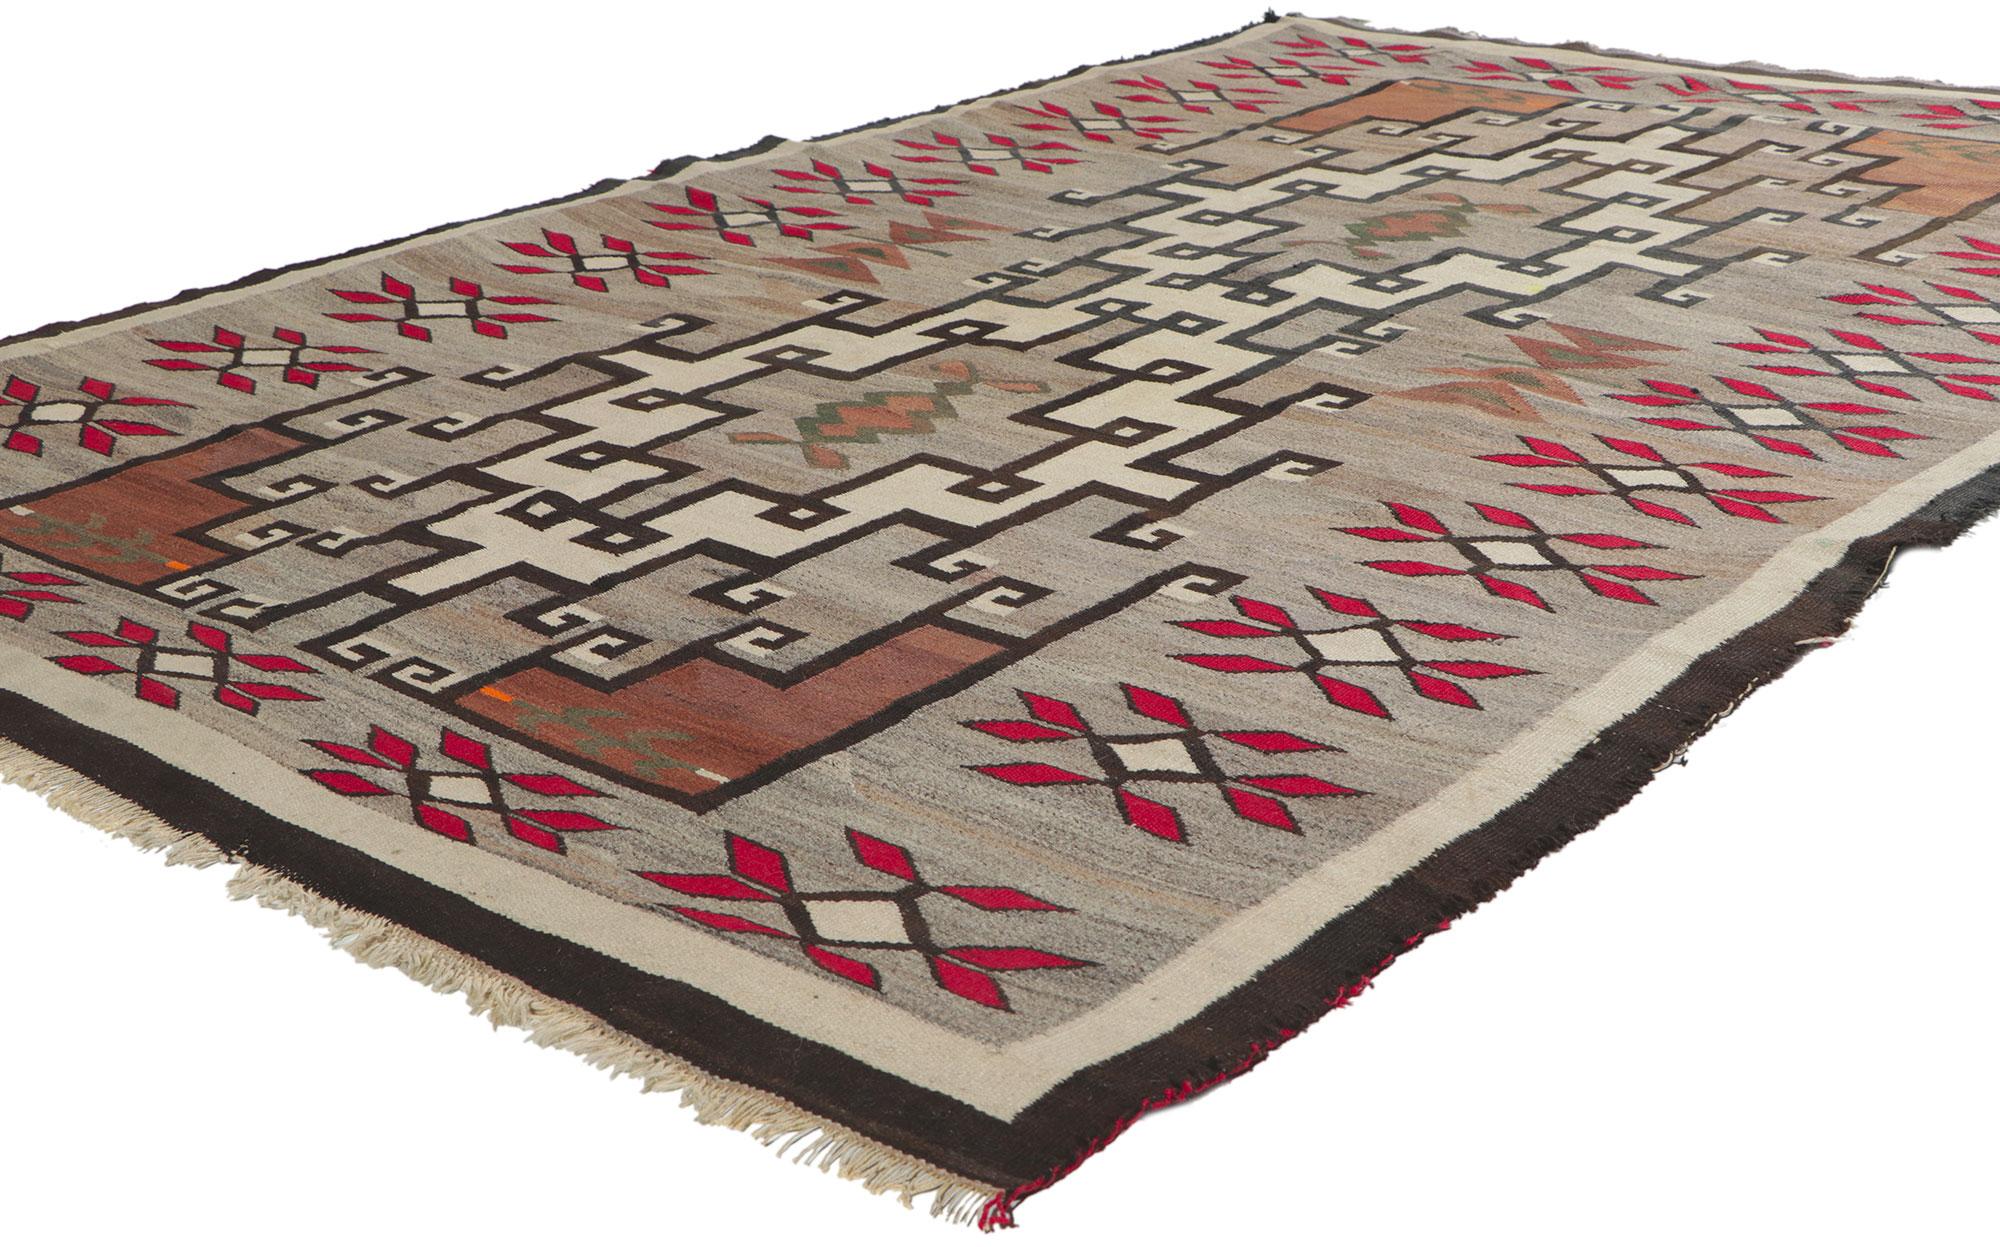 78293 Distressed Vintage Navajo Kilim rug with Native American Style, 04'07 x 07'00. With its bold expressive design, incredible detail and texture, this hand-woven wool vintage Navajo Kilim rug is a captivating vision of woven beauty highlighting